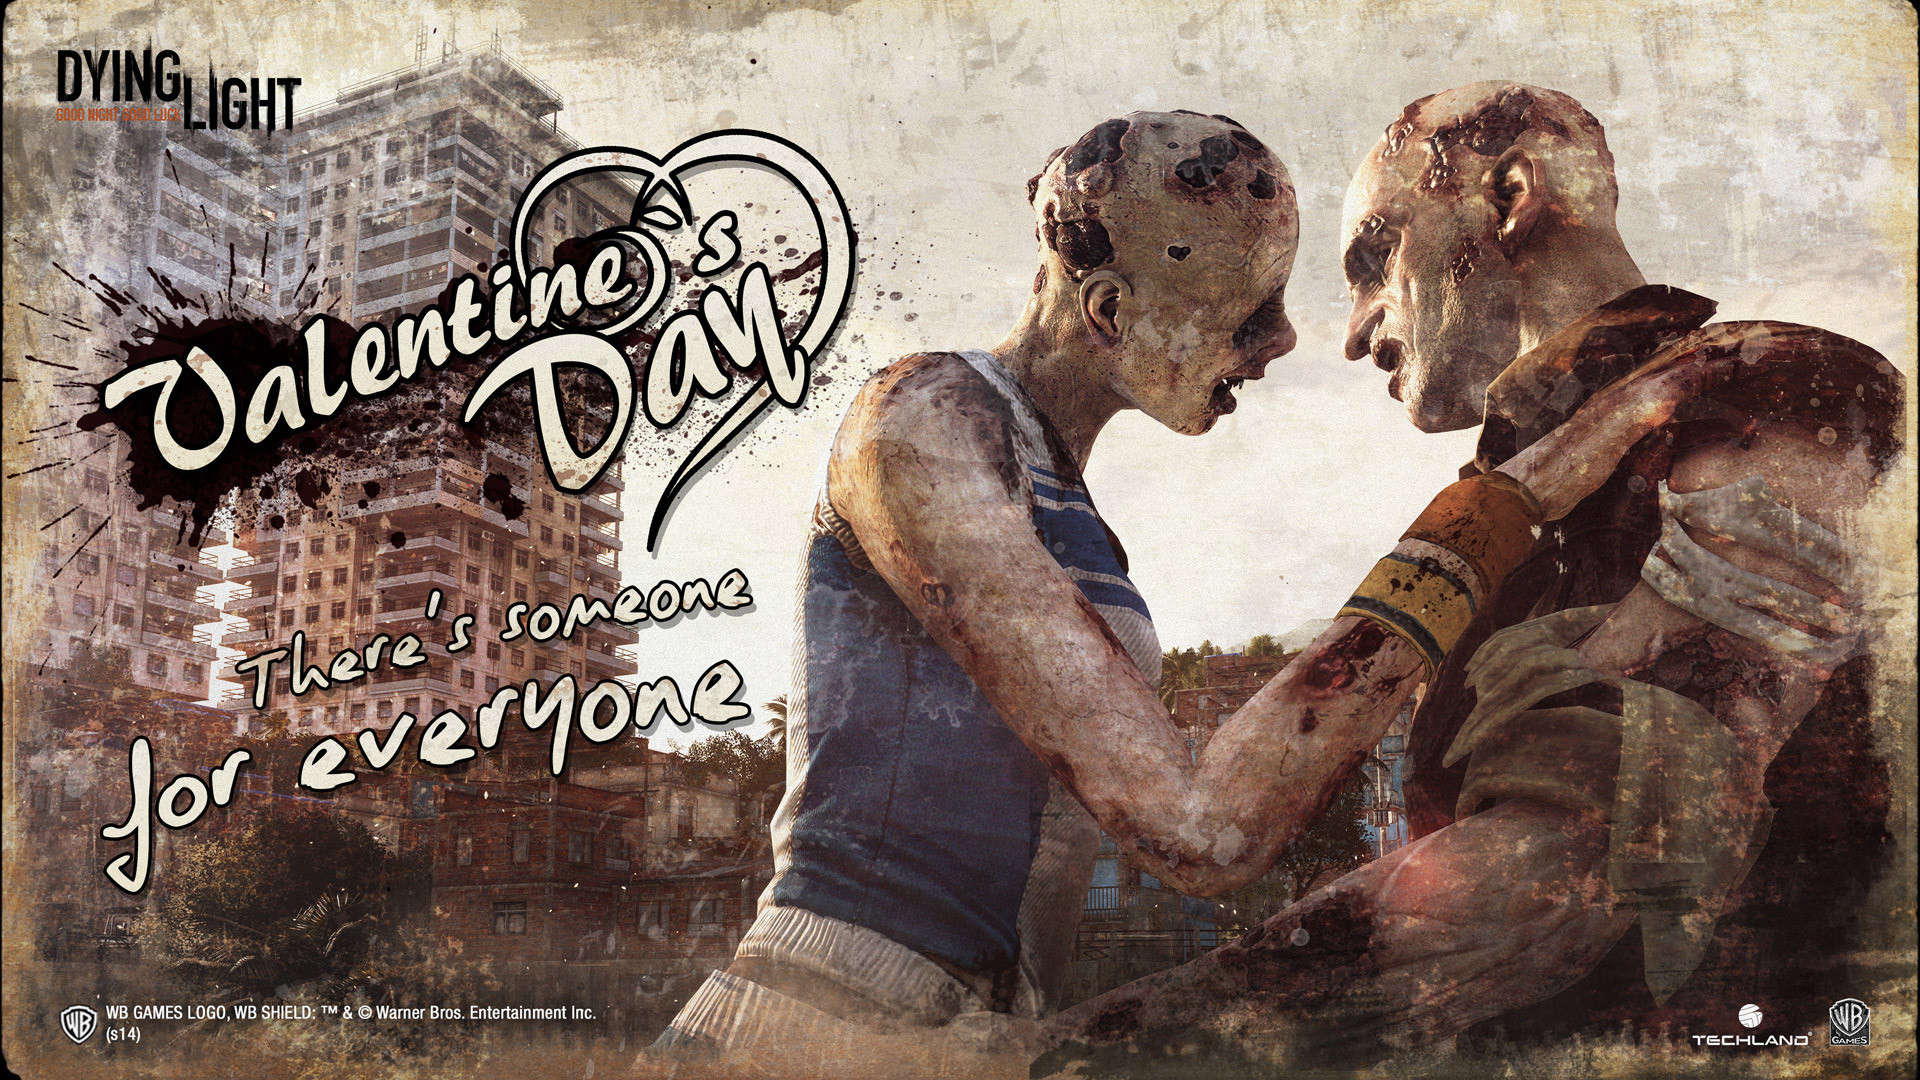 1920x1080 Free Dying Light Wallpaper in 